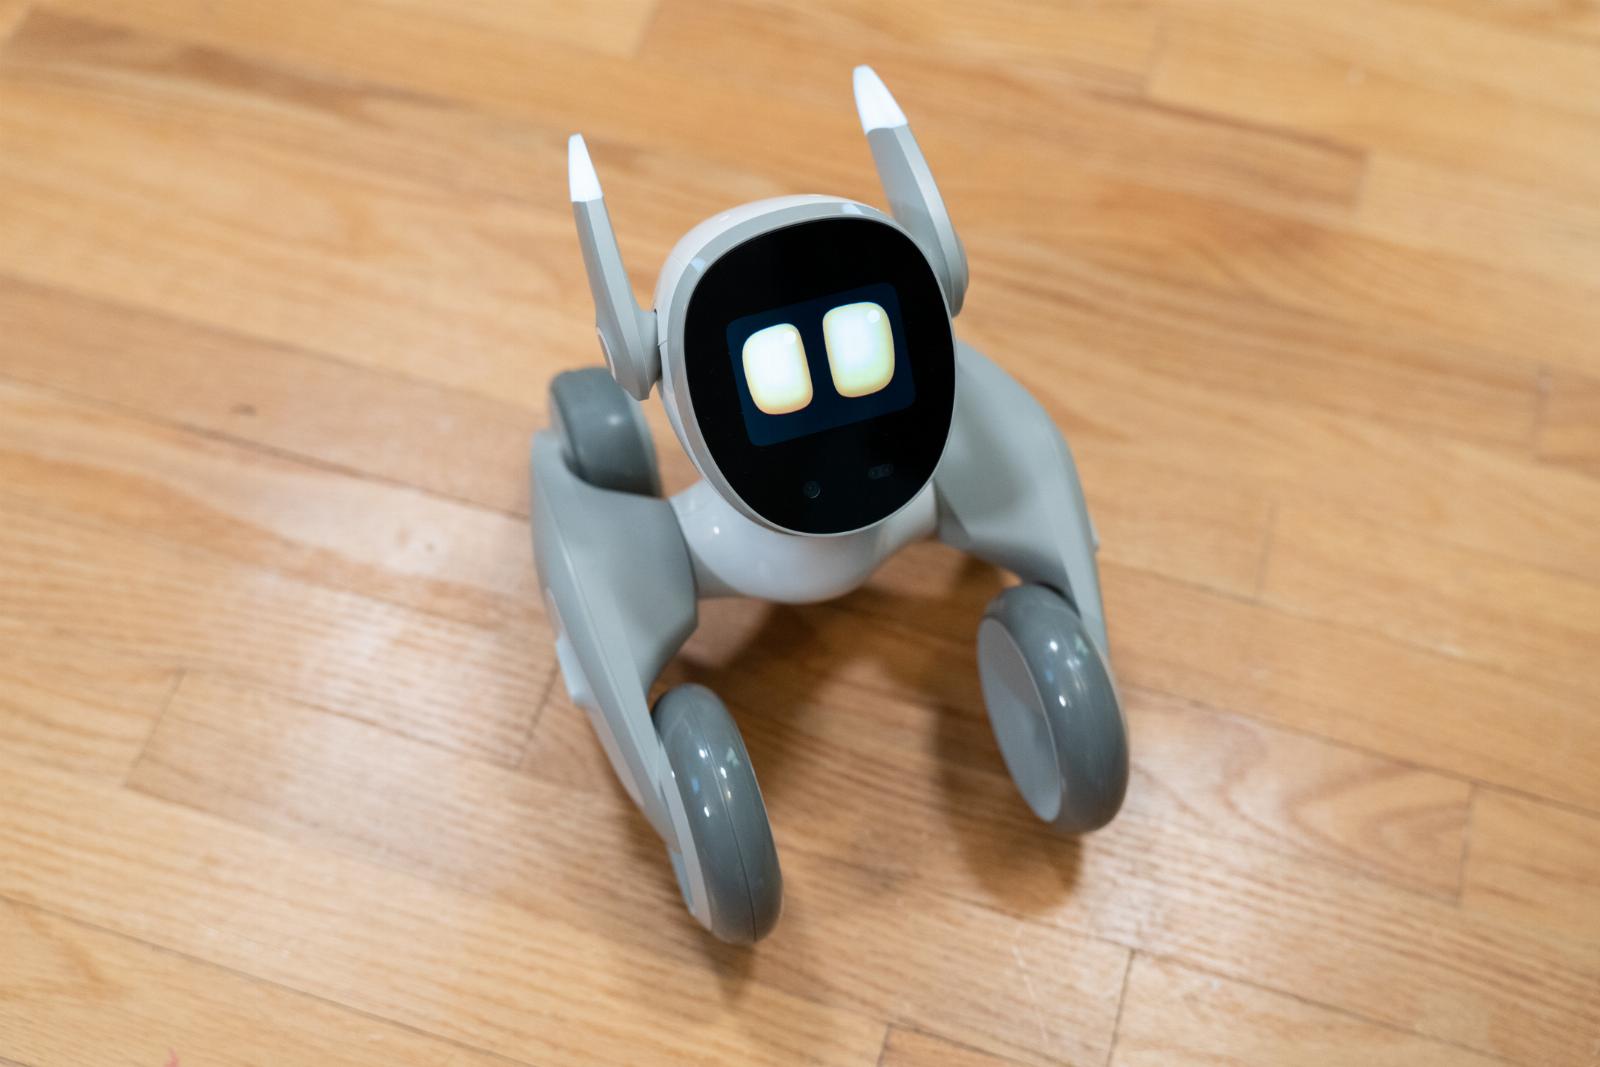 Like me, Loona the Petbot is dumb but lovable